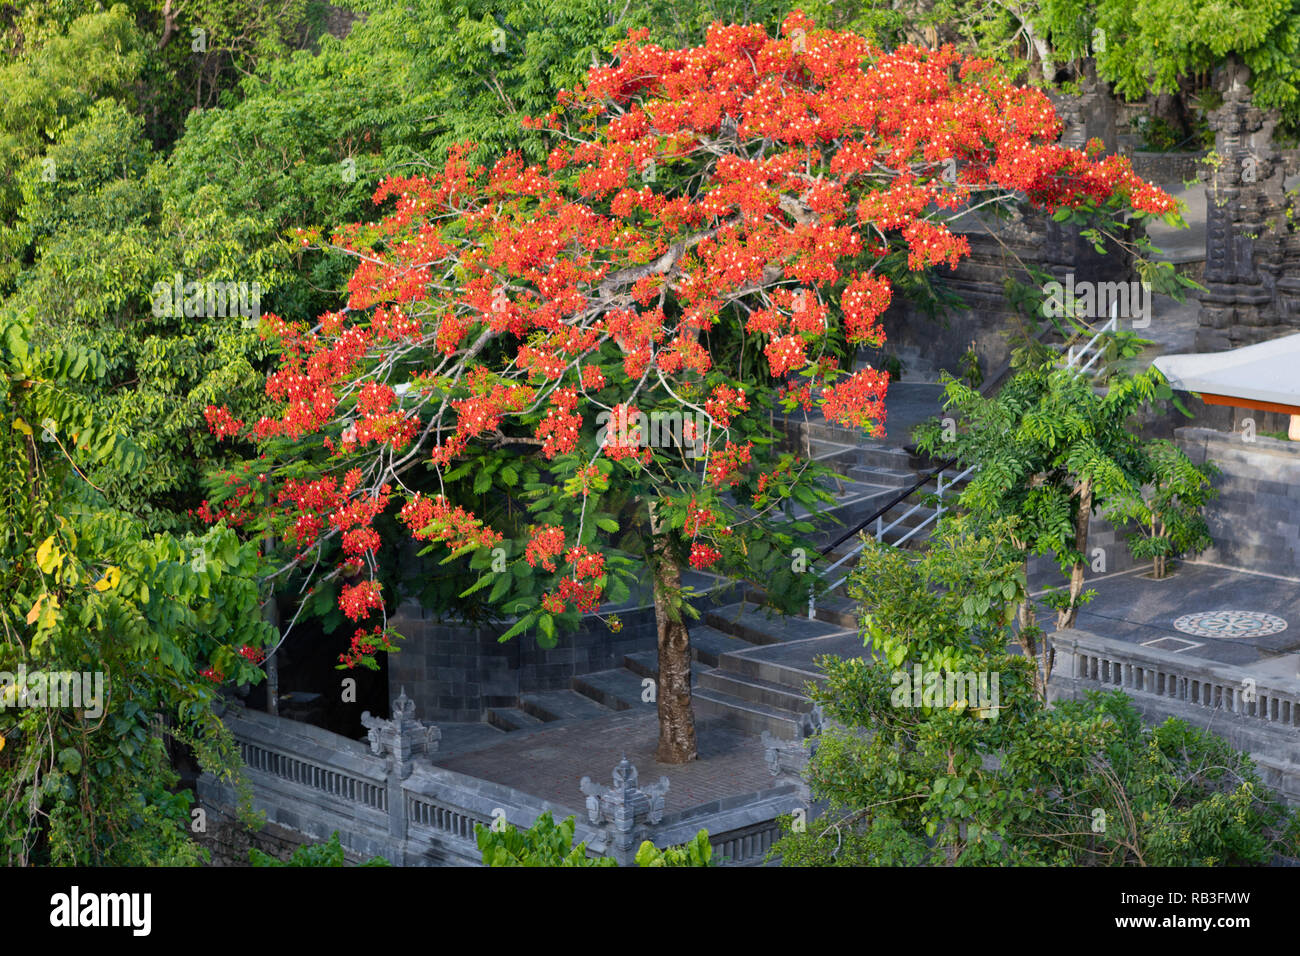 Tropical Gulmohar tree, with flame colored flowers, stands in a Balinese Hindu temple complex Stock Photo